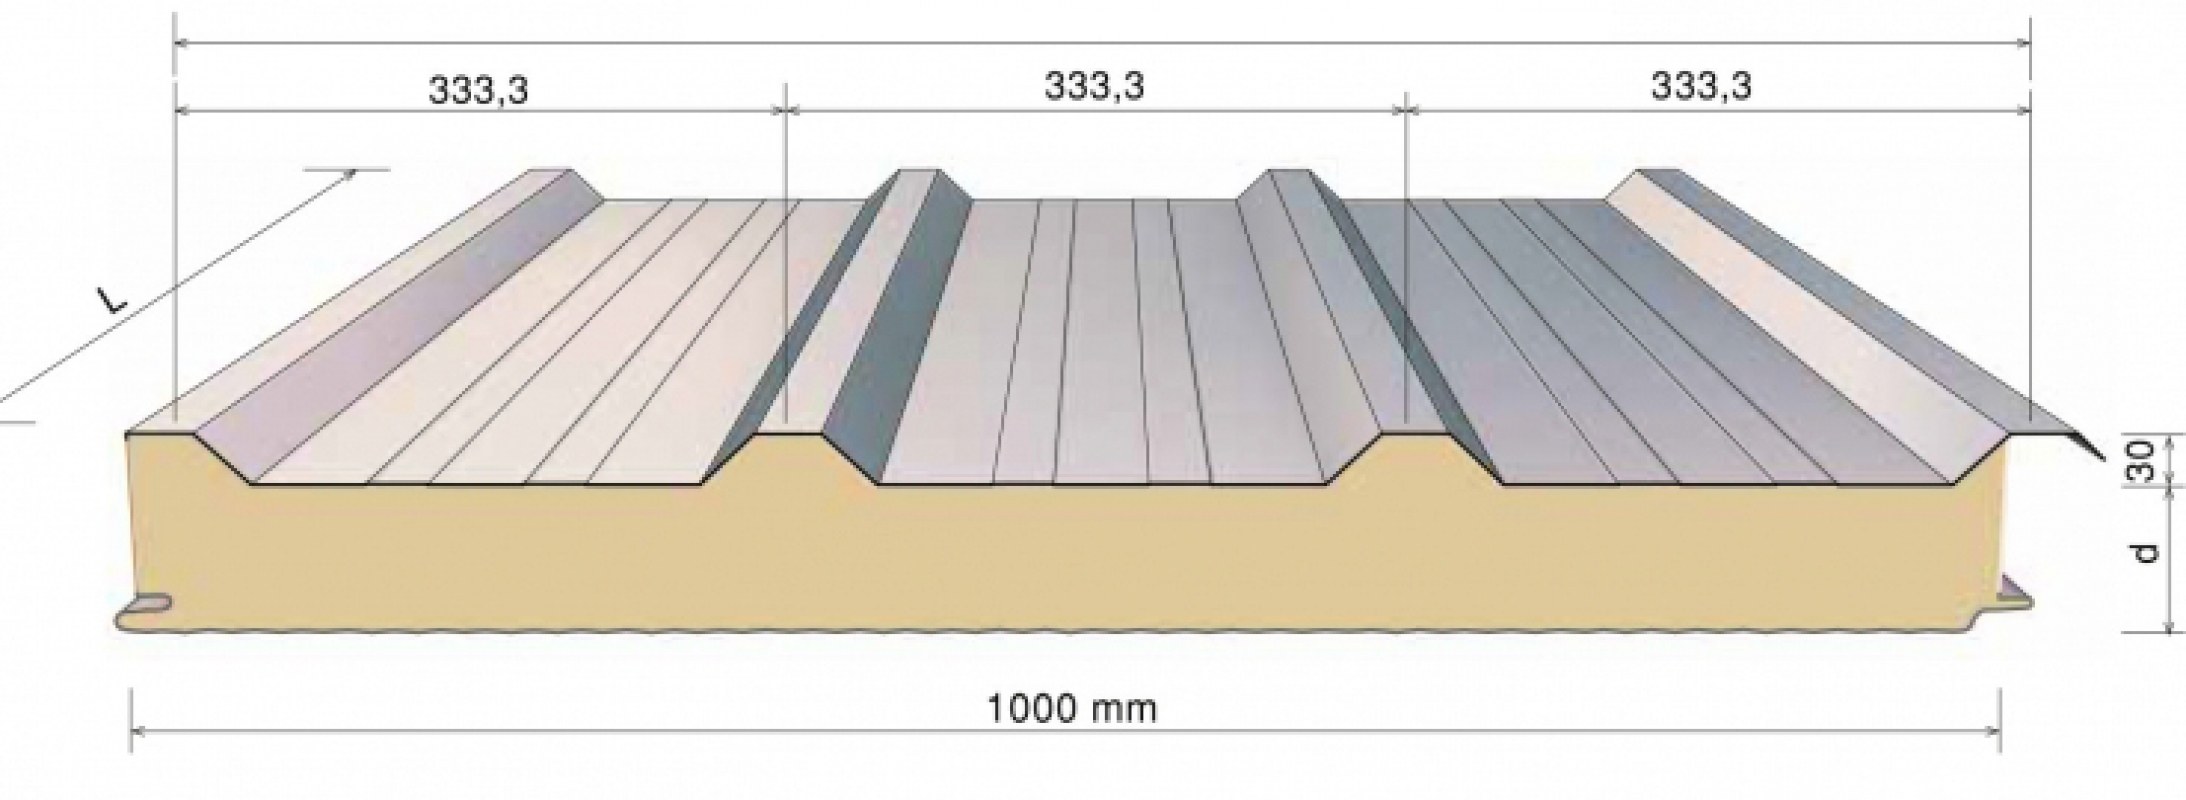 Conservatory Roof Insulation Panels Cheapest Sales, Save 46% | jlcatj ...